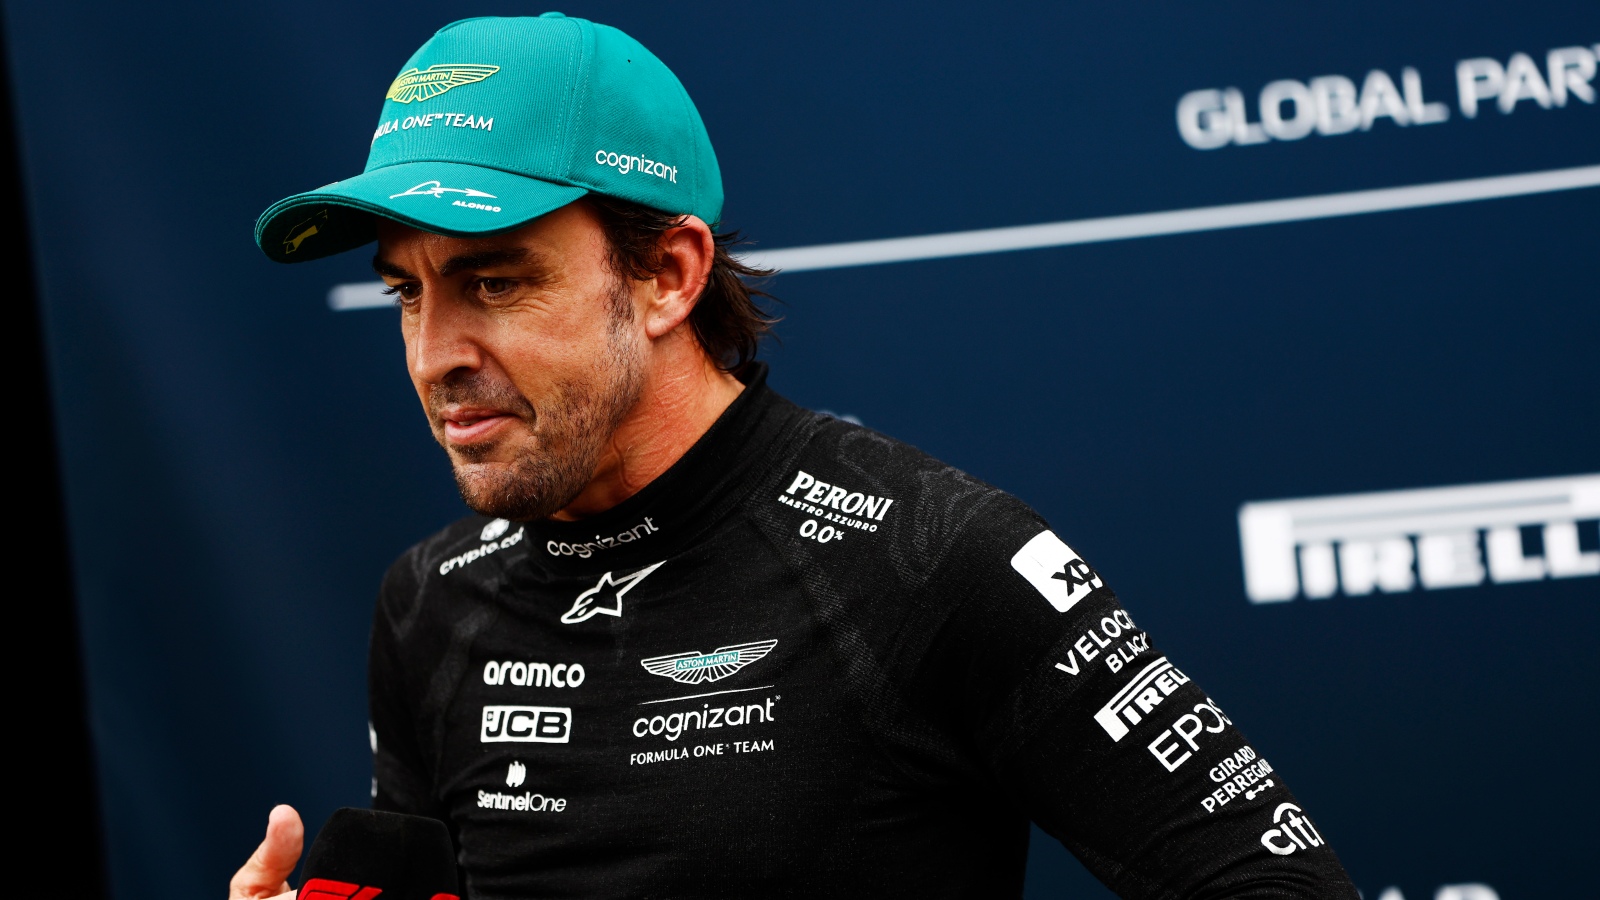 Fernando Alonso Reveals One Condition Which Will Make Him